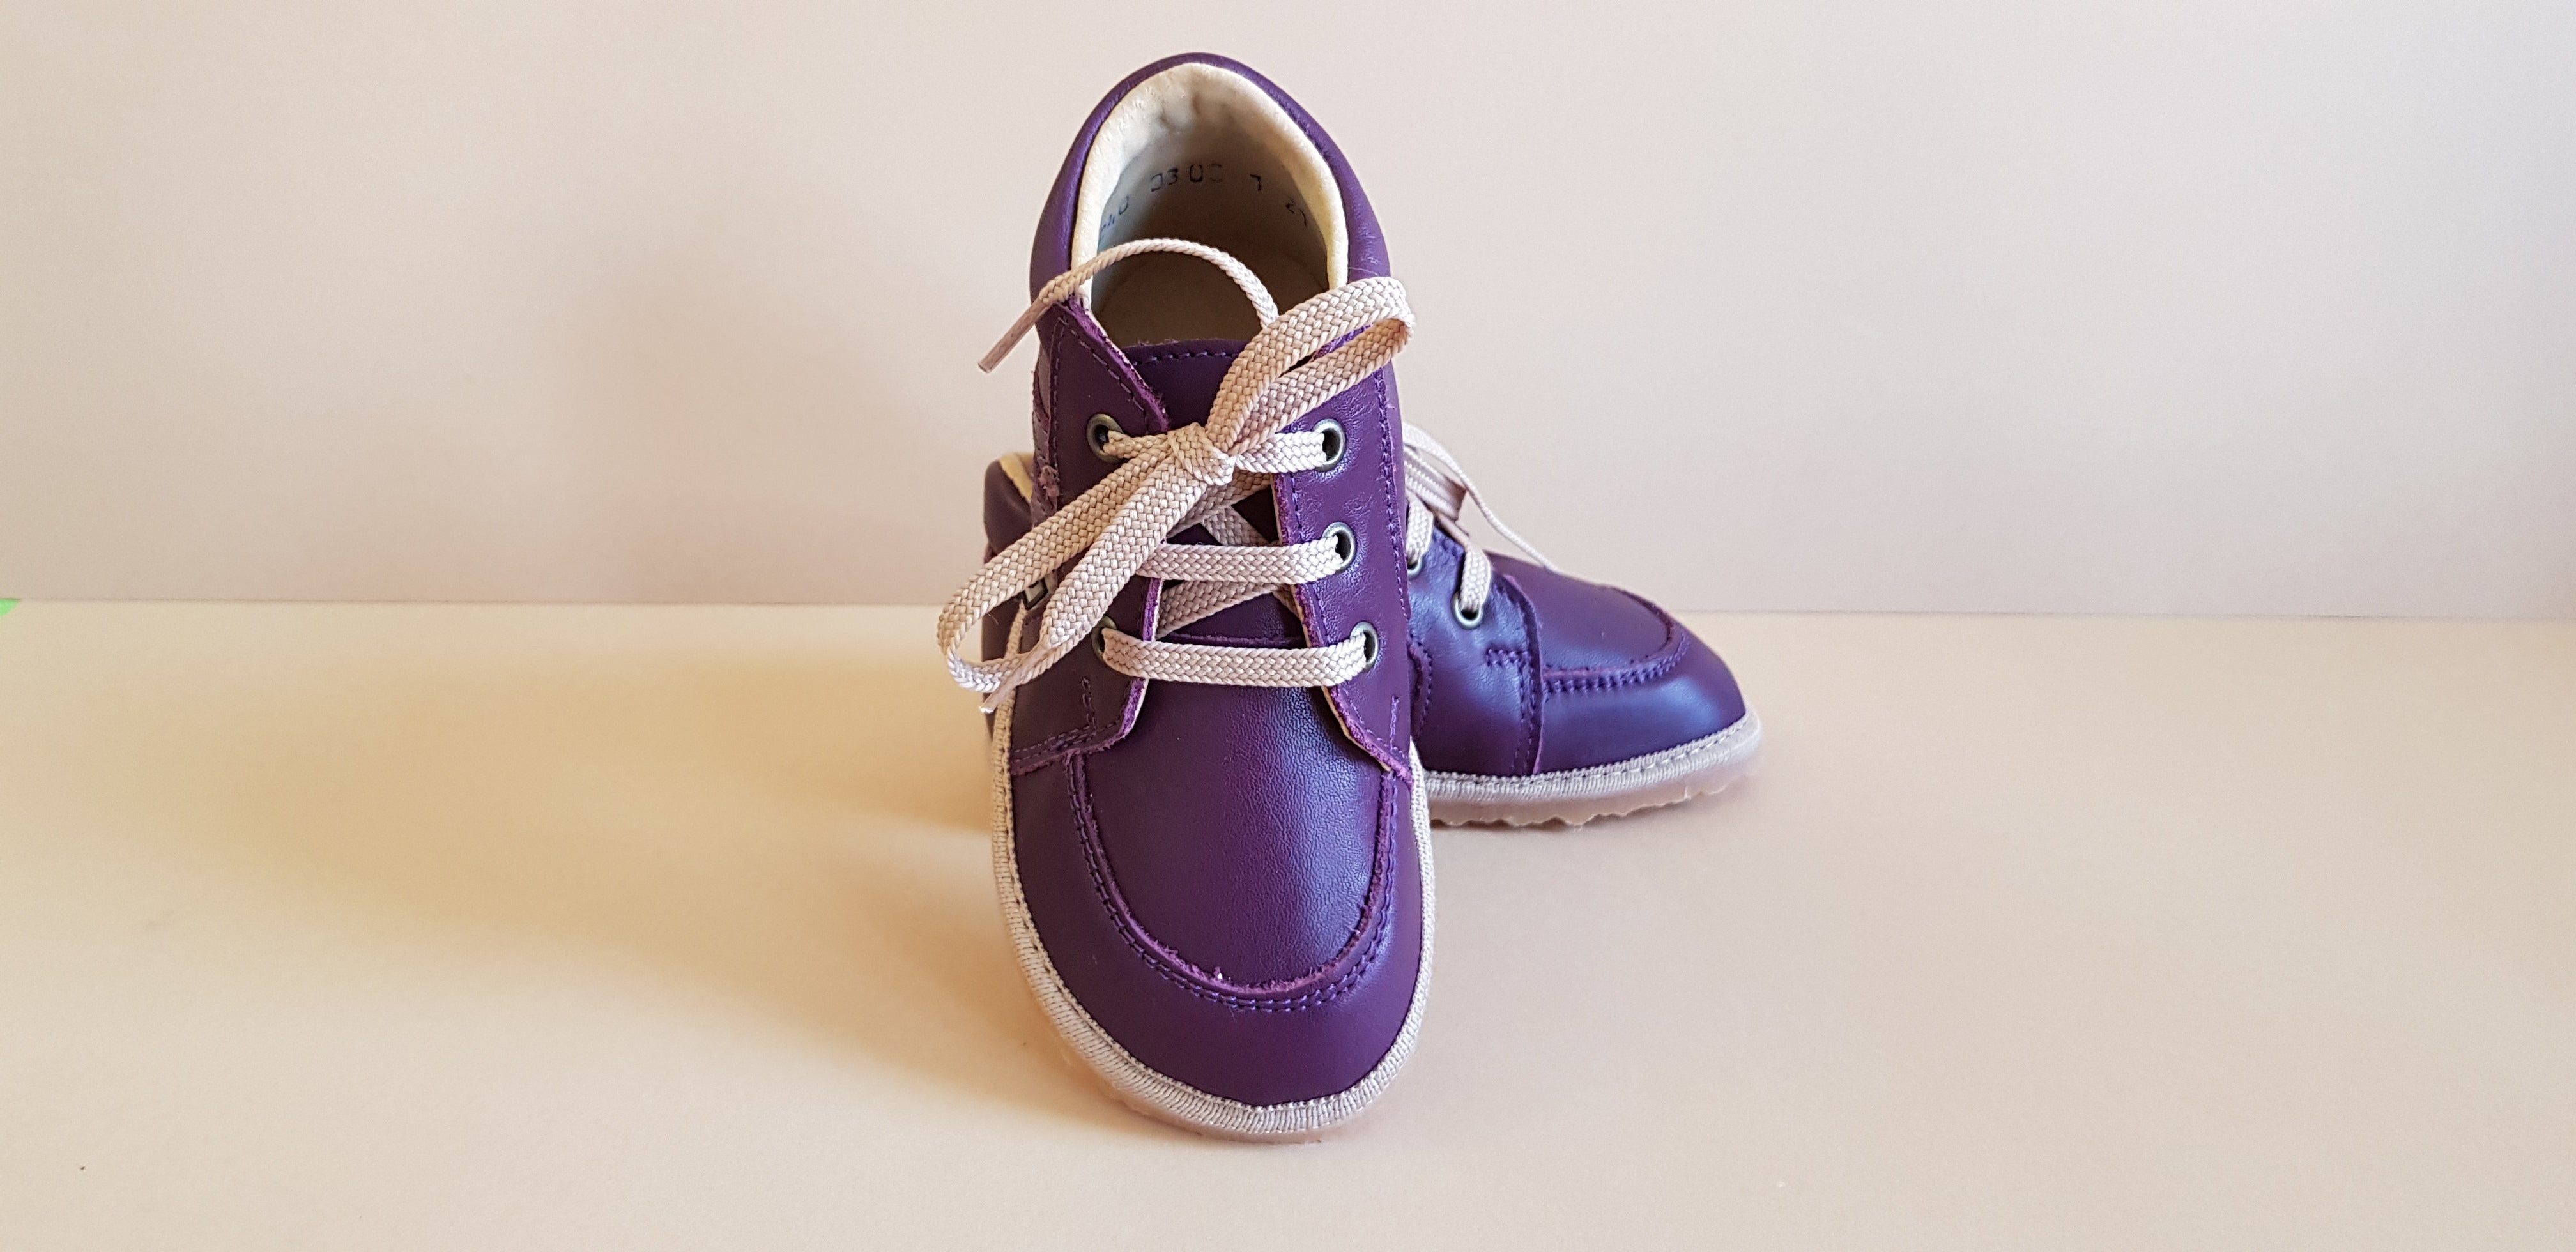 First Walking shoes with laces - Purple